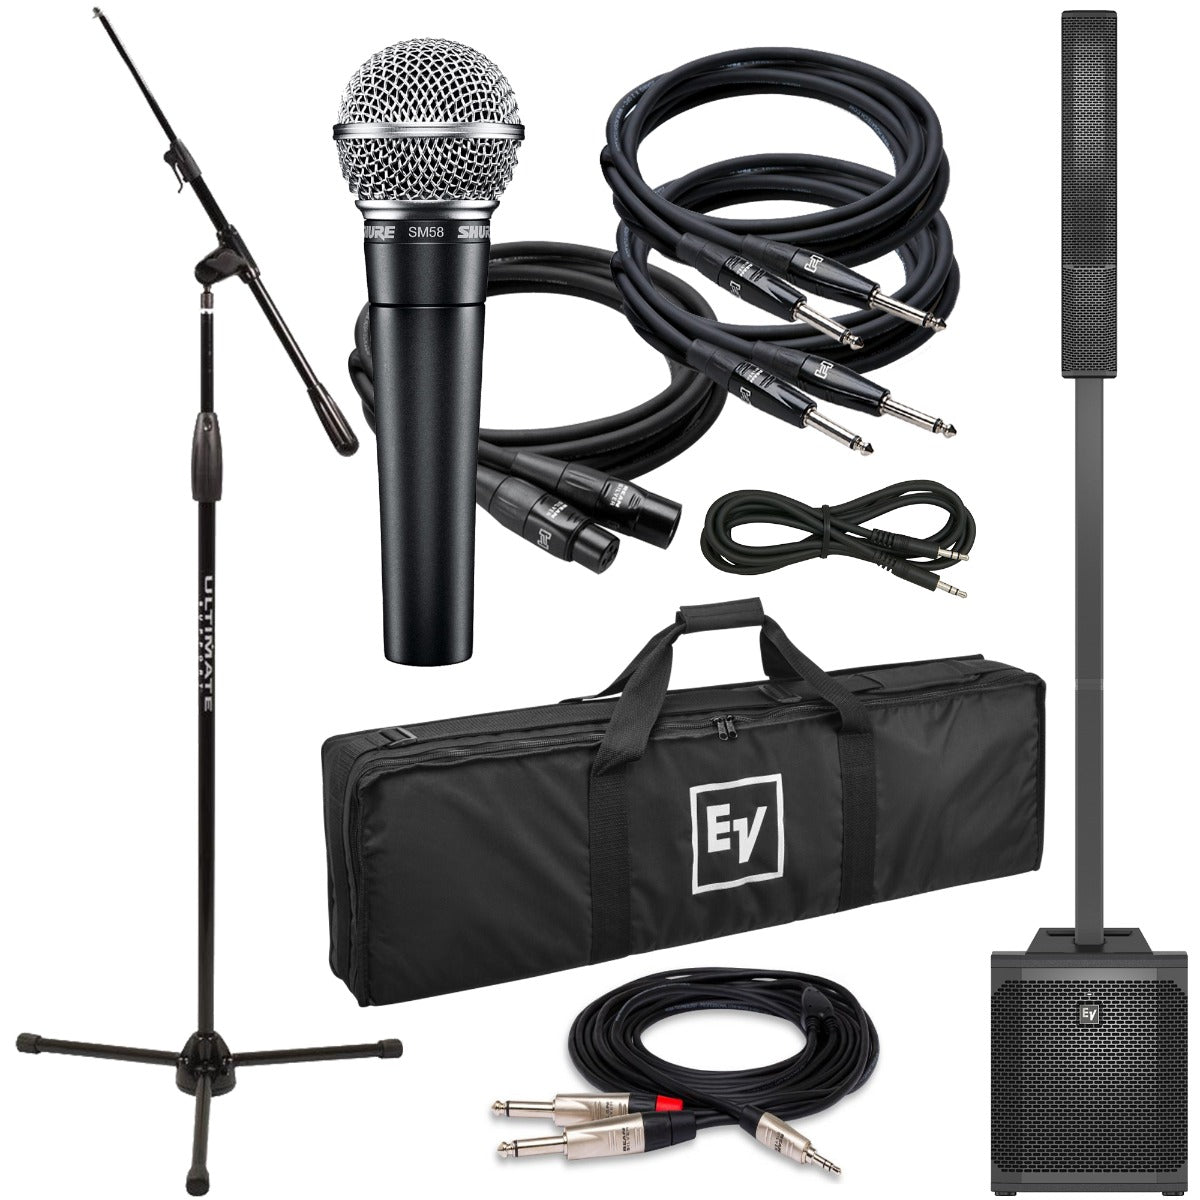 Collage of the components in the Electro-Voice Evolve 30M Portable Column System - Black PERFORMER PAK bundle